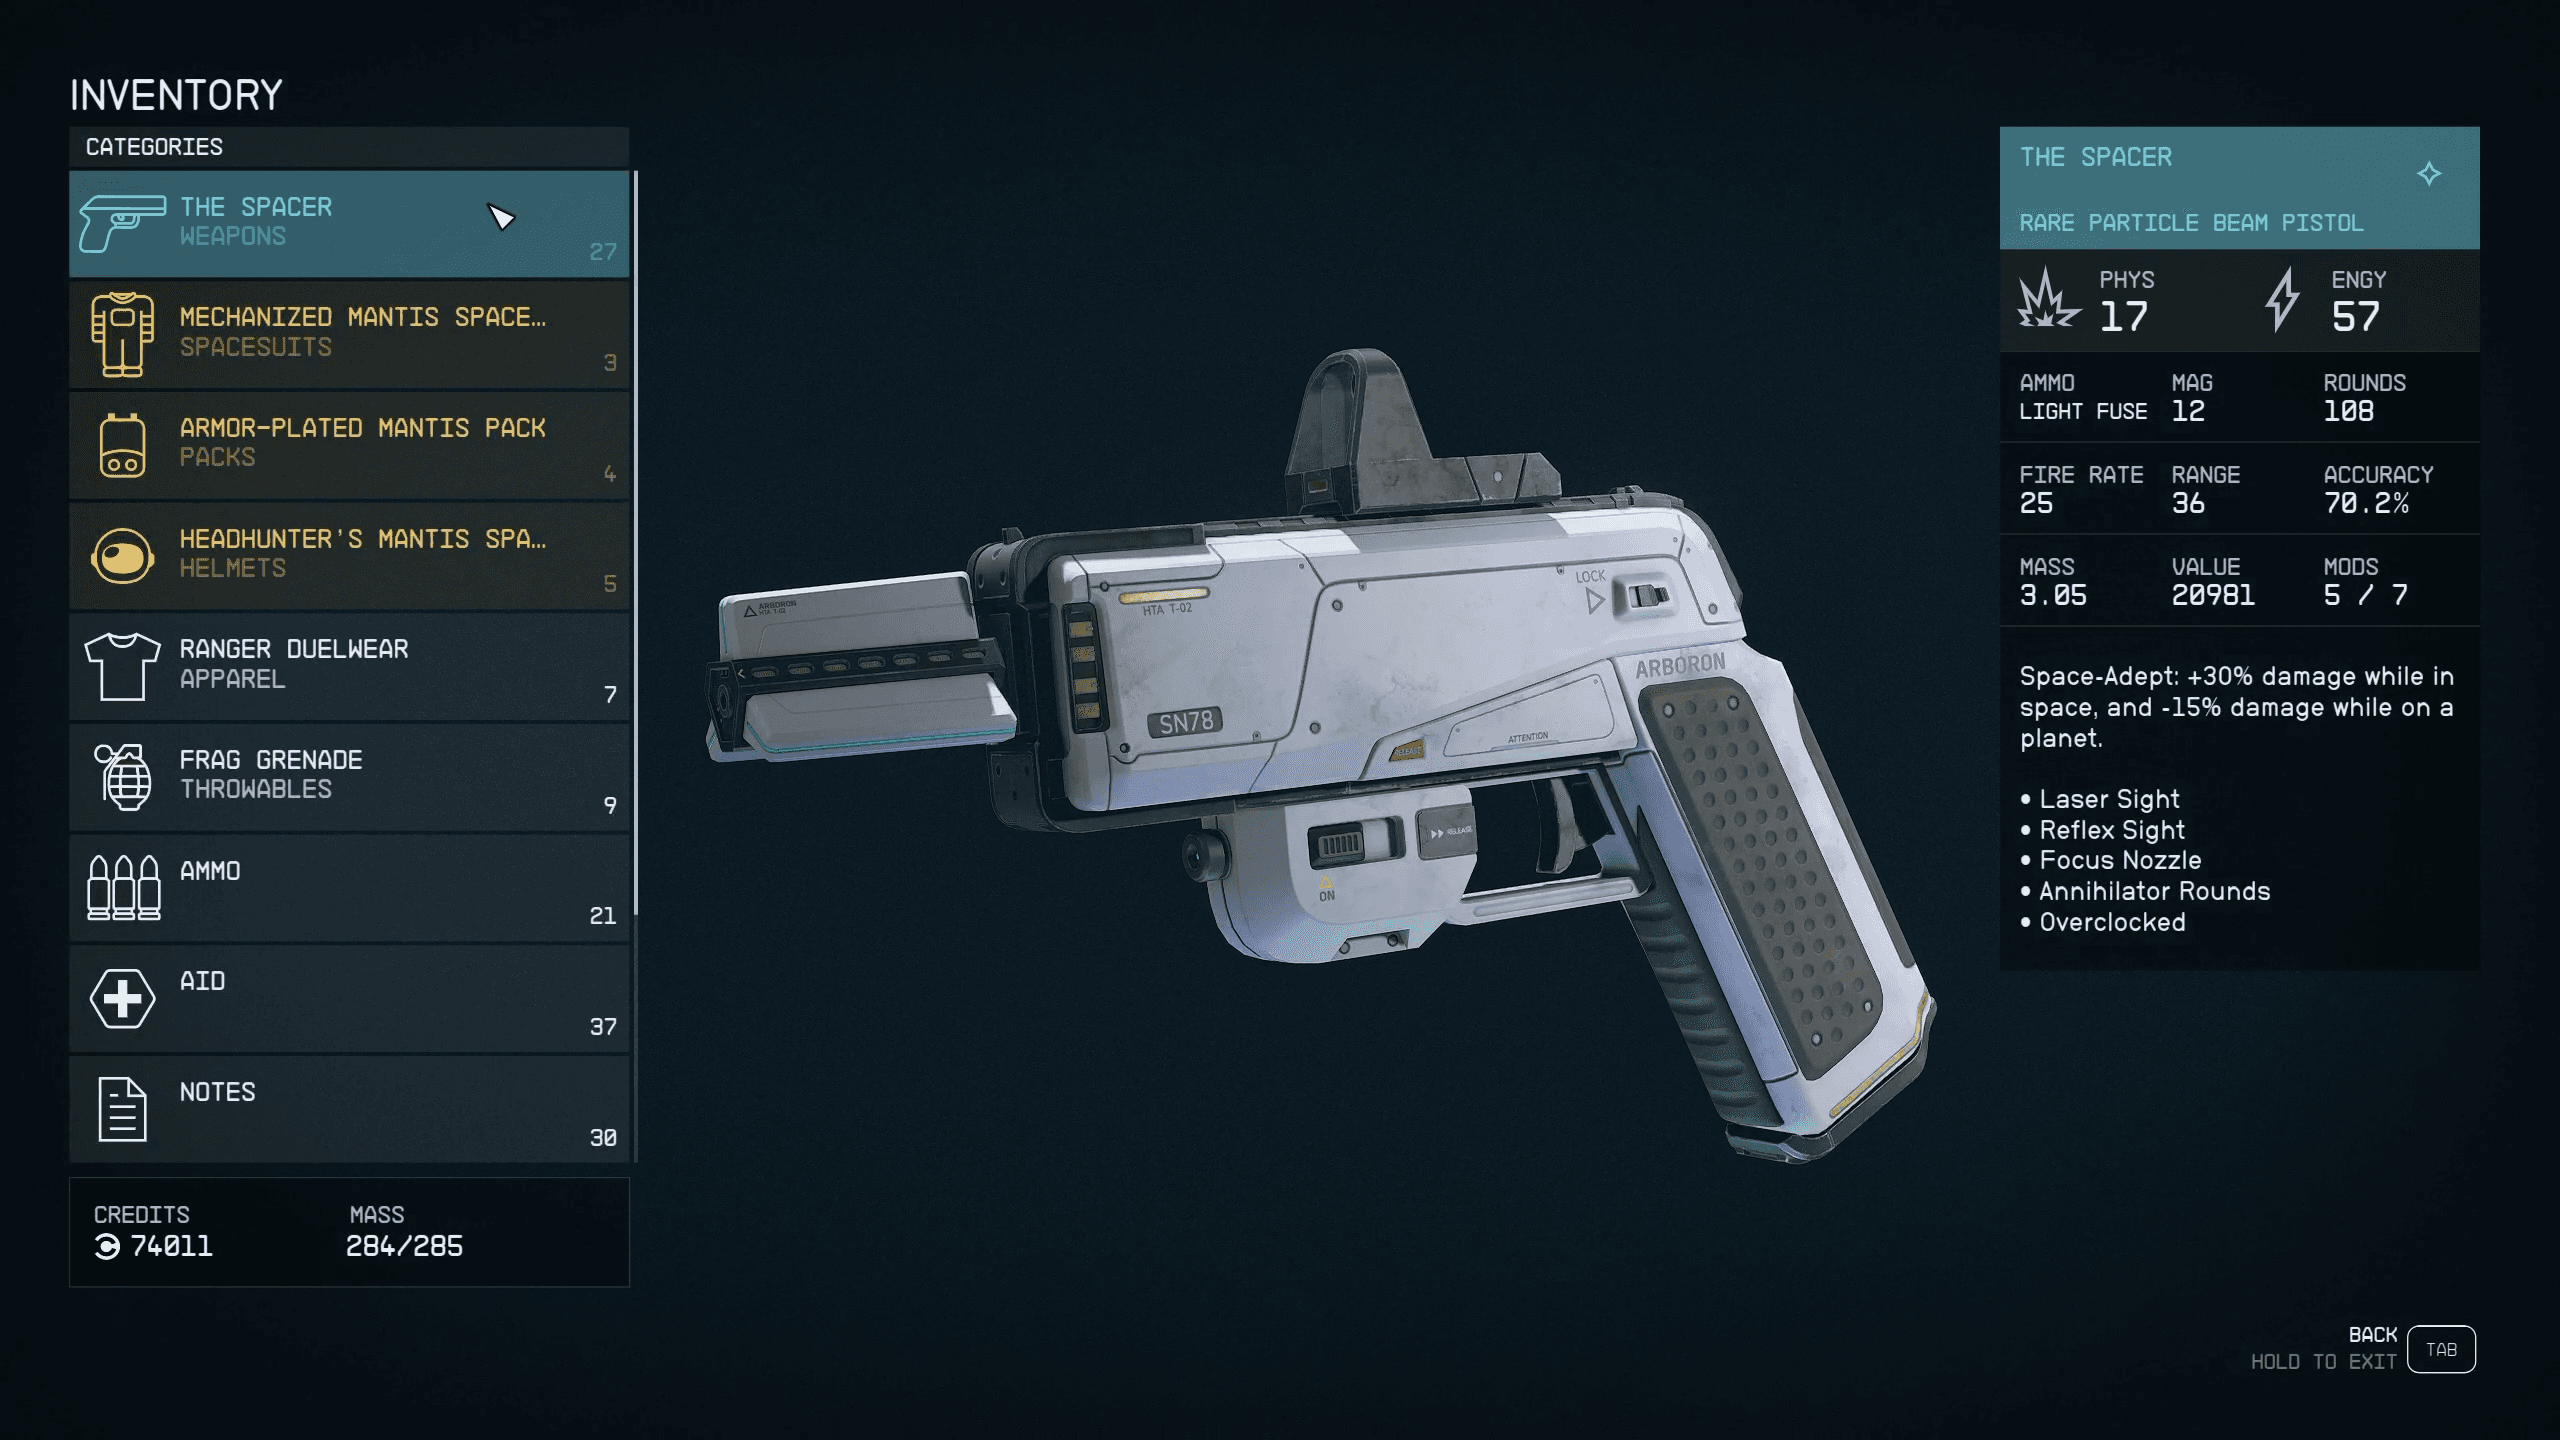 The Spacer Rare Particle Beam Pistol